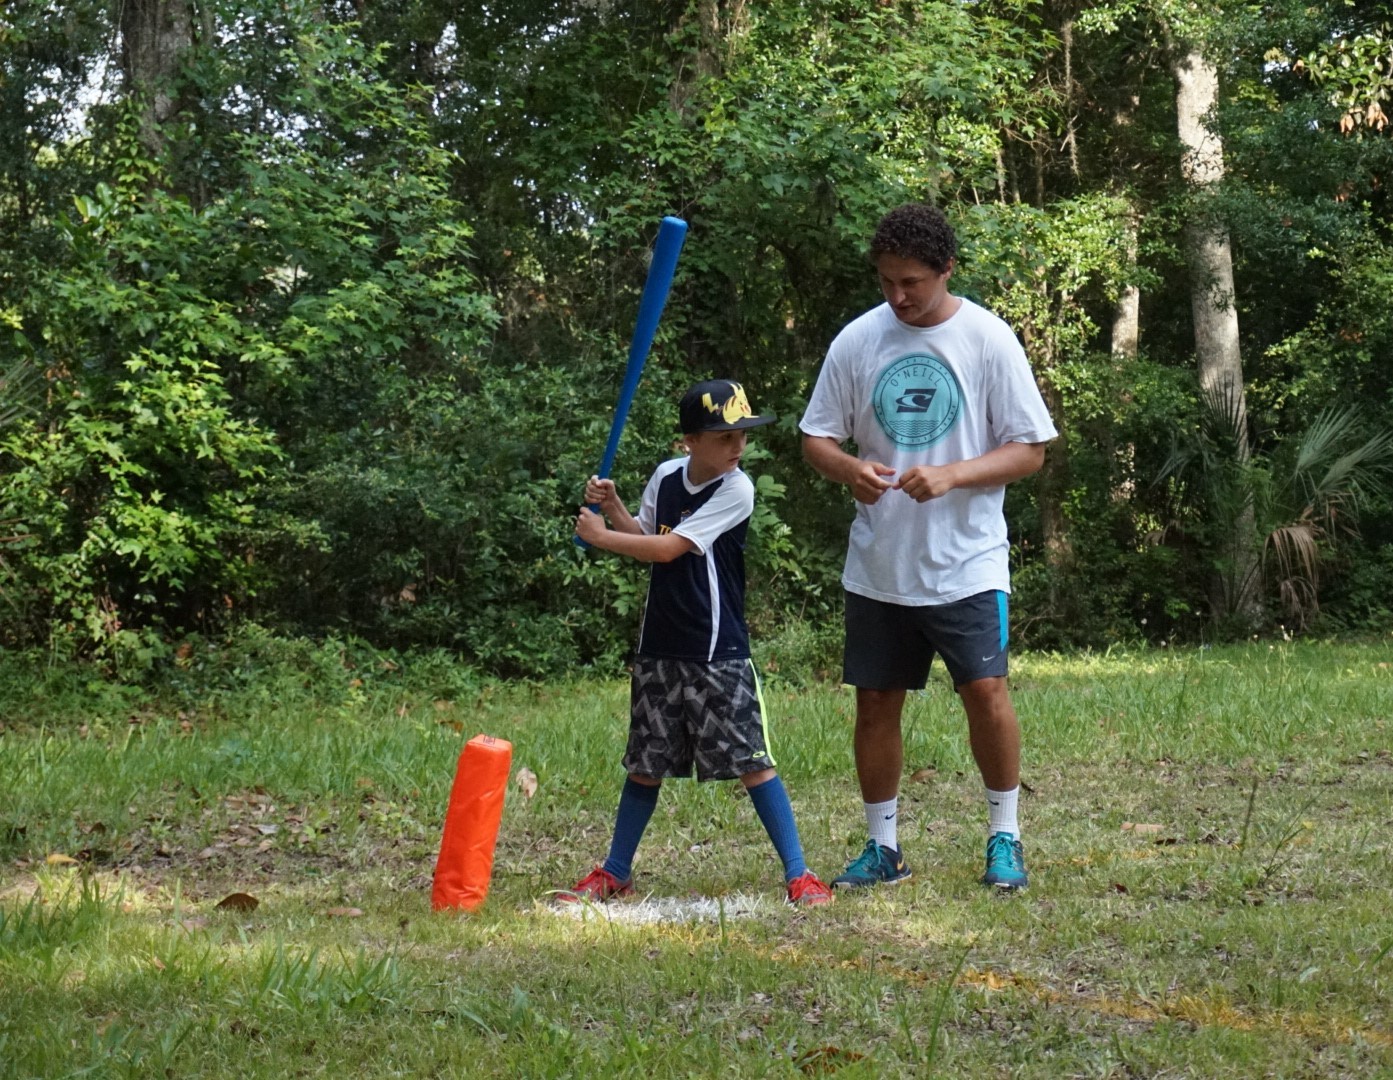 Counselor Alex Awad gives Clayton Payne tips before his swing